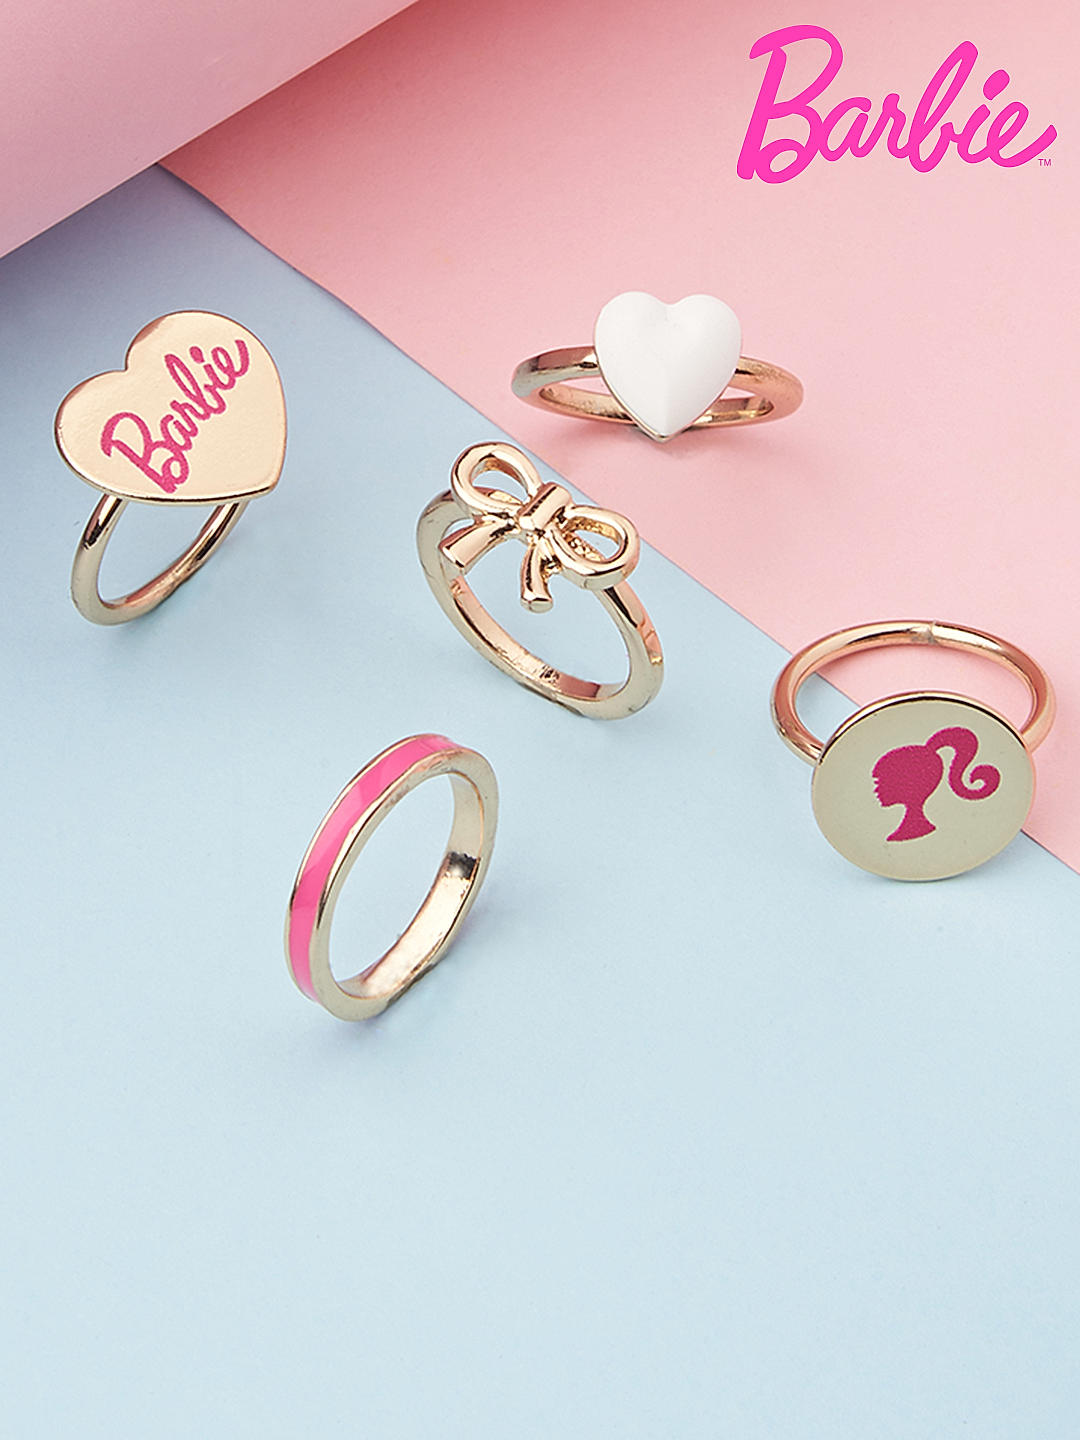 What are the best types of trending ring sets that one must shop for